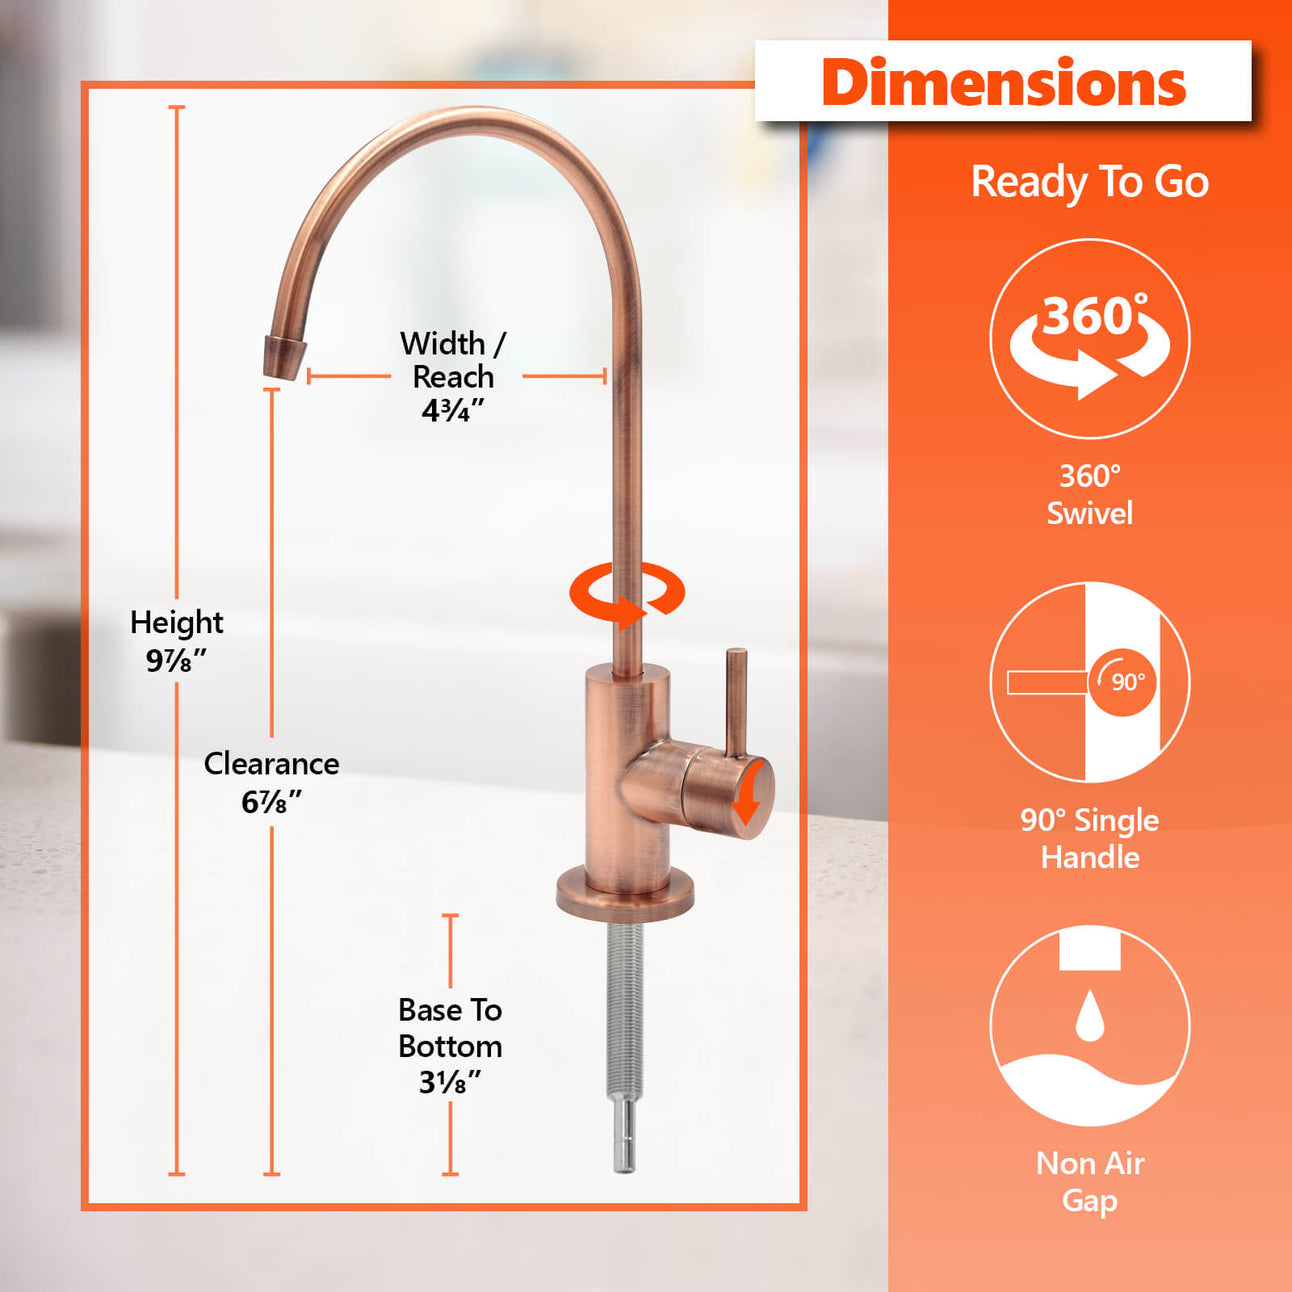 Express Water Modern Water Filter Faucet – Brushed Copper Faucet – 100% Lead-Free Drinking Water Faucet – Compatible with Reverse Osmosis Water Filtration Systems